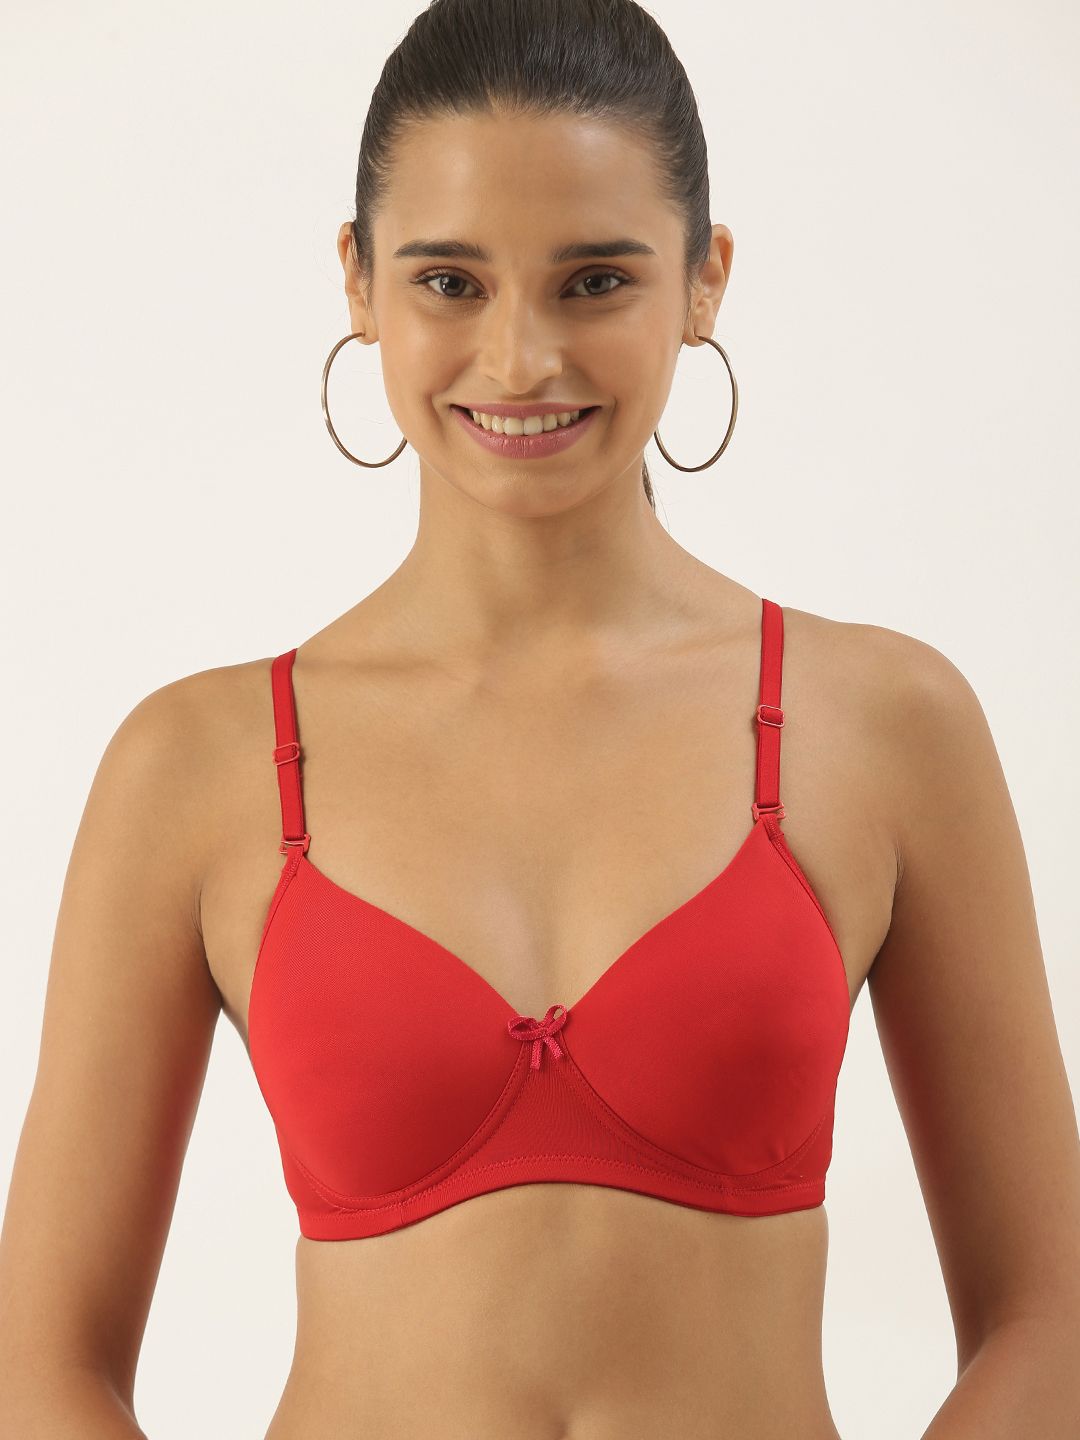 Buy DressBerry DressBerry Black Solid Non-Wired Non Padded Everyday Bra  PM-003 at Redfynd